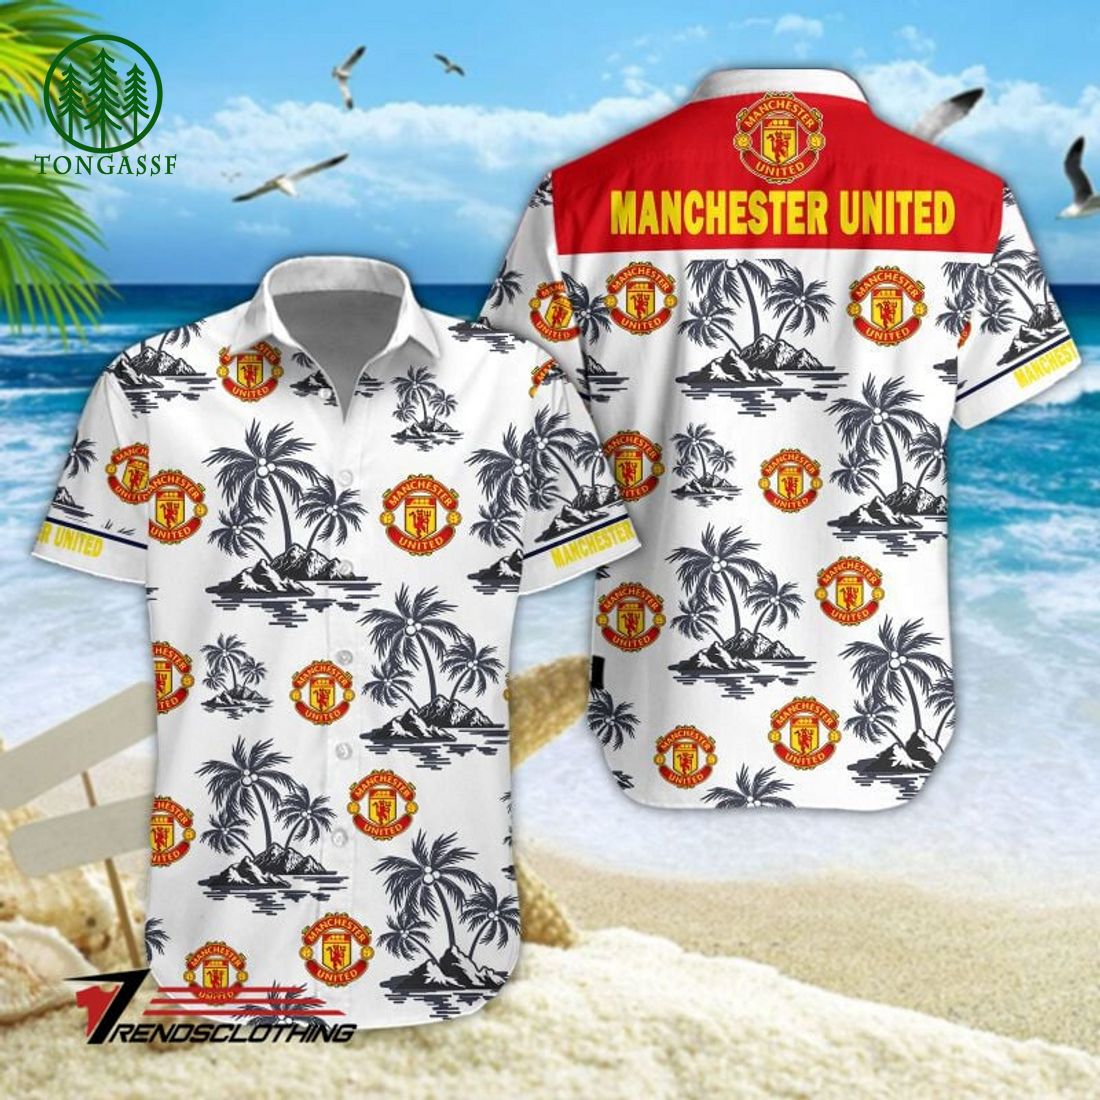 ⚡SPECIAL⚡

⚡Manchester United Premier League White Hawaiian Shirt⚡

➡️Get it now: tongassf.com/hainam/manches…

#tongassf #tongassfstore #PremierLeague #HawaiianShirt